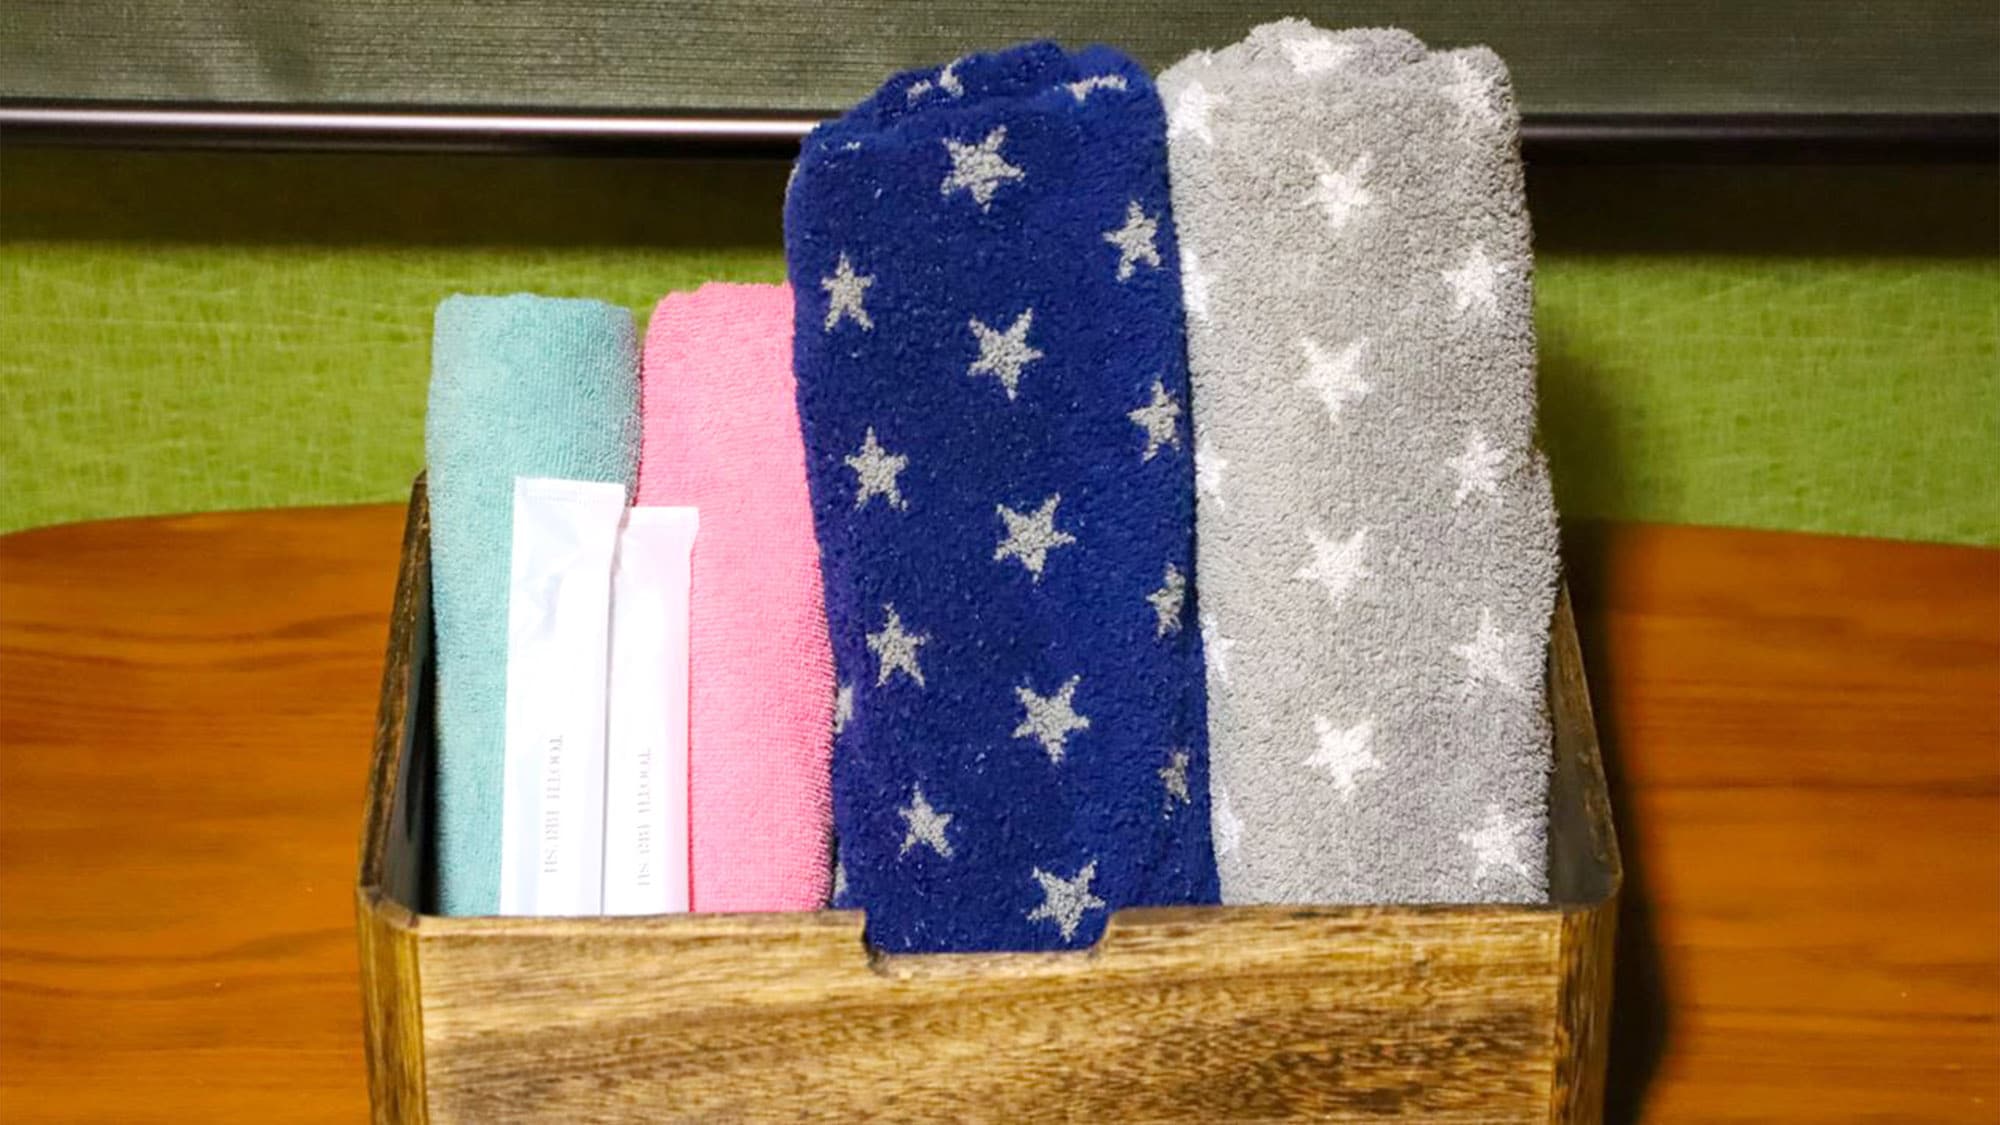 ・ Toothbrush, bath towel and face towel are available in each room.